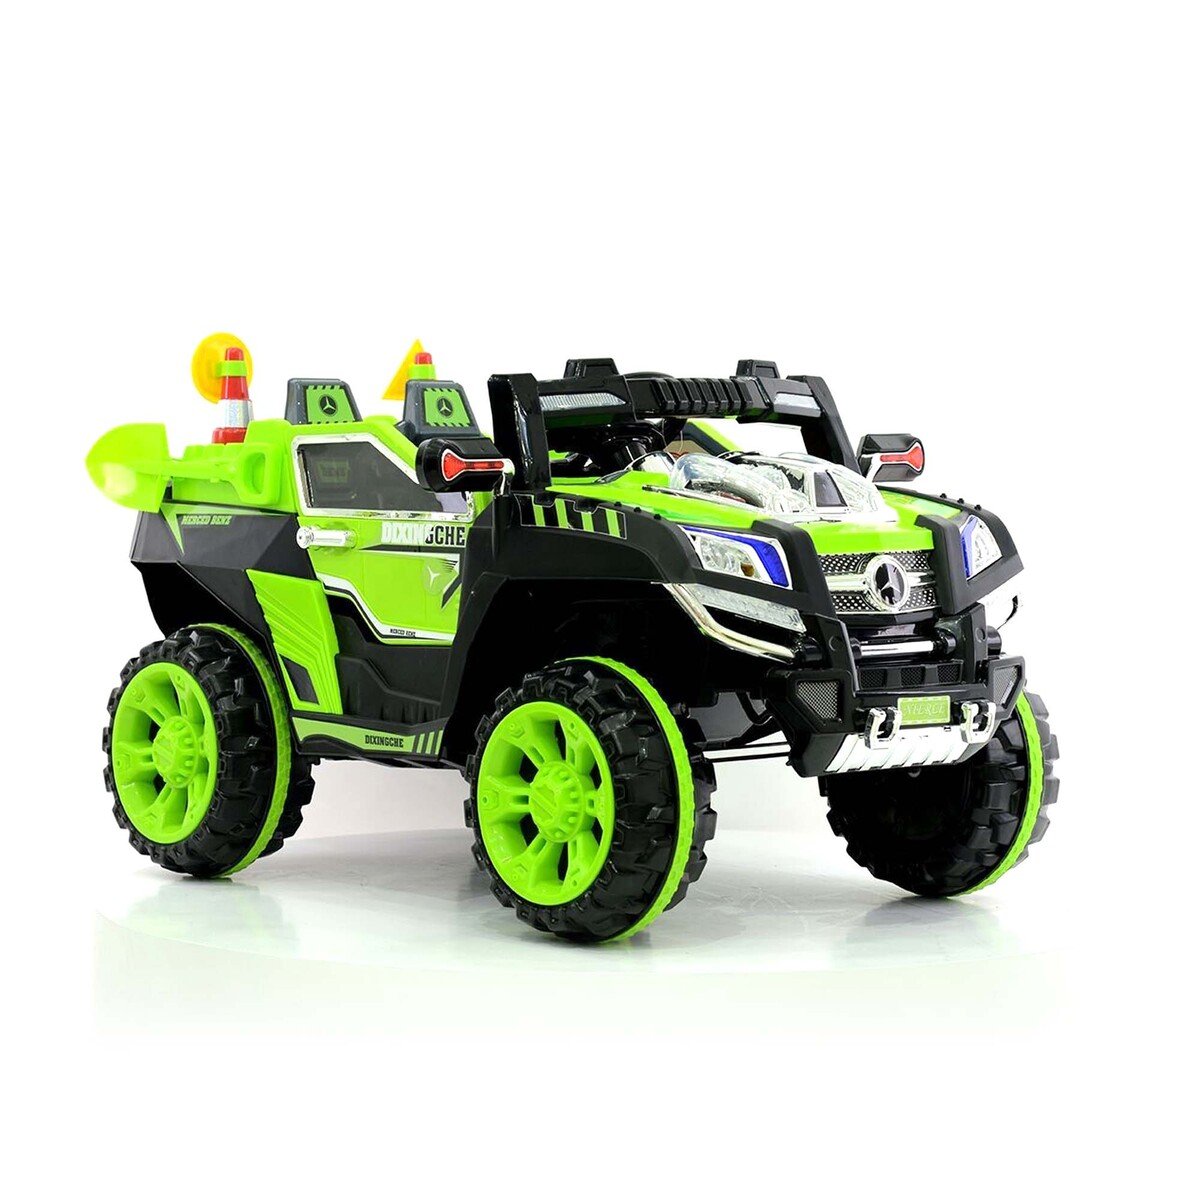 Skid Fusion Kids Battery Operated Motor Car NEL-803 Green